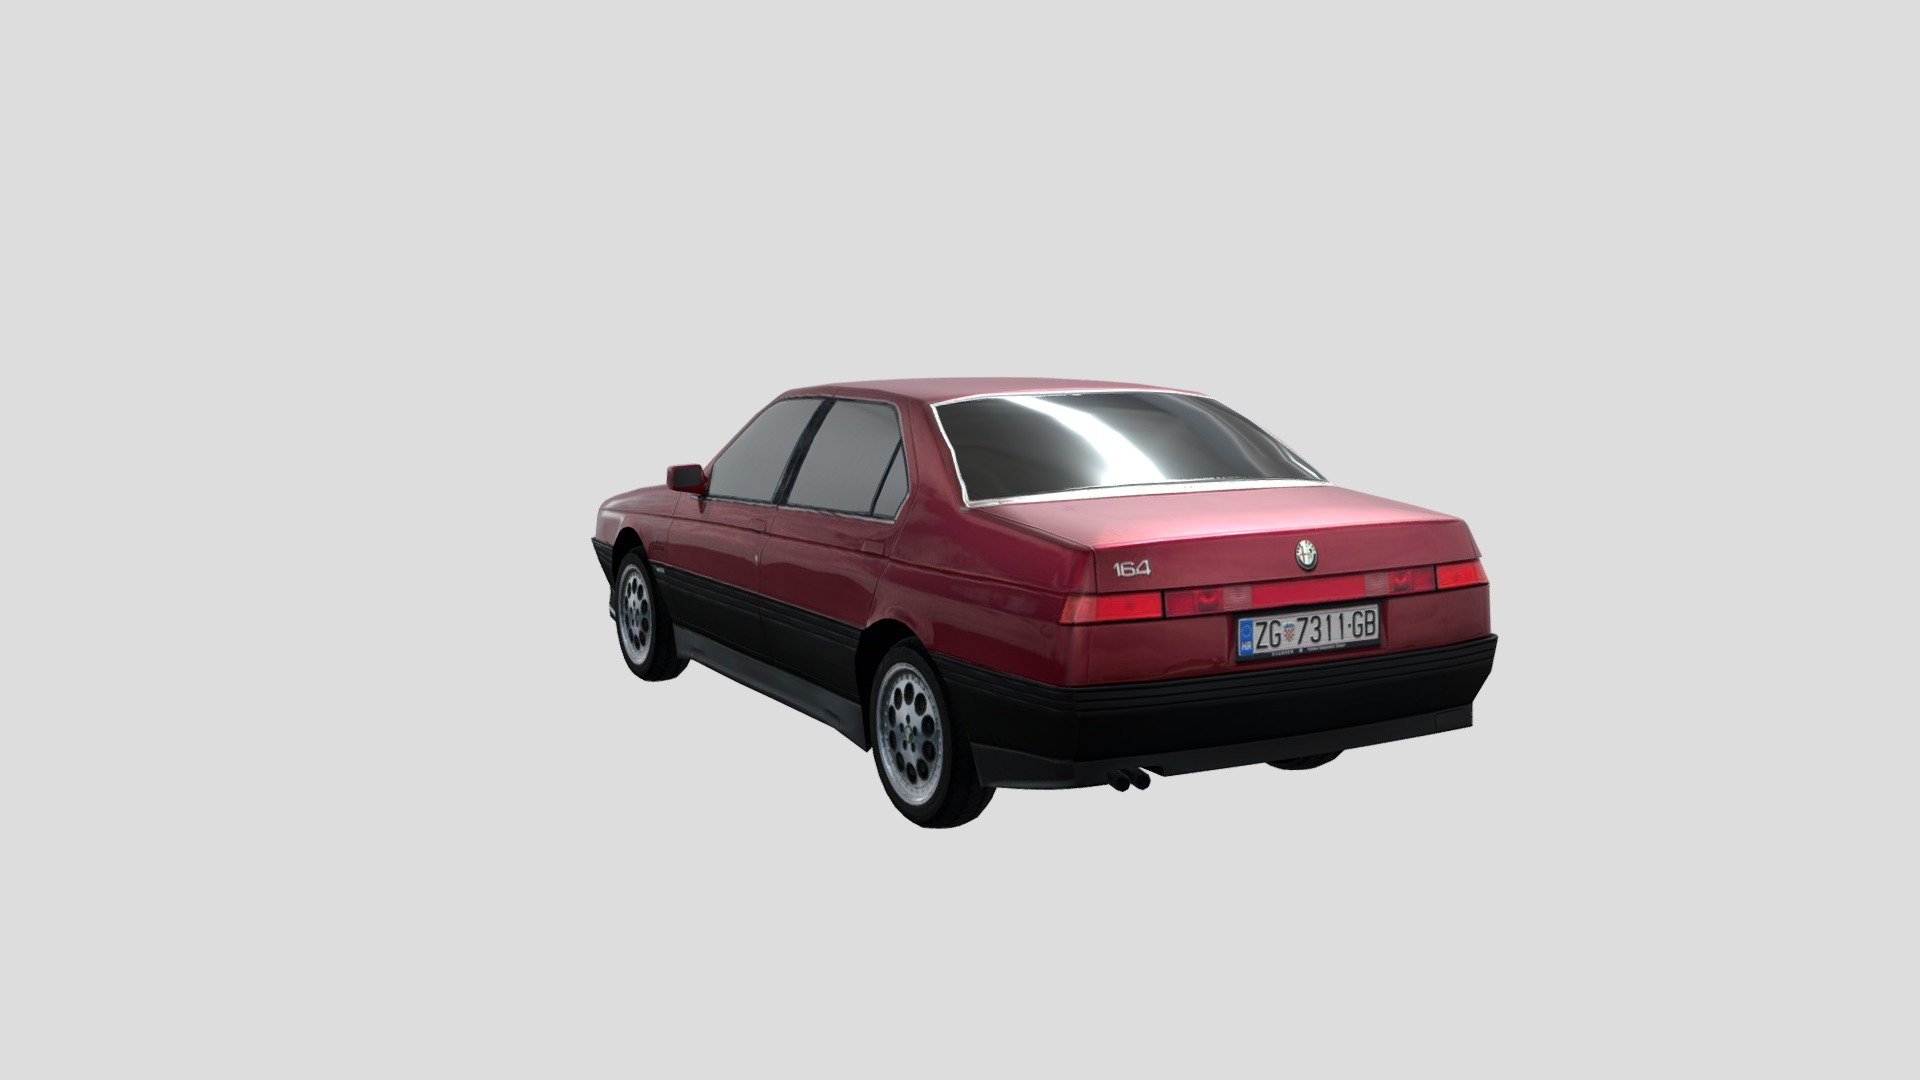 https://www.youtube.com/watch?v=DudzN1tK0U0

This business-class sedan produced by Alfa Romeo from 1987 to 1998. It was the flagship model of the brand. A total of 273857 cars were produced.

In October 1978, Alfa Romeo, FIAT, Lancia and SAAB came to an agreement to develop separate business class models on the Type Four platform, thus, such cars as the Alfa Romeo 164, Saab 9000, Fiat Croma, Lancia Thema appeared in the development process. . The FIAT and Lancia models were similar to the Saab in many ways, while the Alfa Romeo 164 shared only the chassis with them.

The 164 was designed by Enrico Fumia of Pininfarina. In 1993, the design of the model was slightly updated. Over the years of production, cars have been equipped with a wide range (16 versions) of V-shaped and in-line engines ranging 2-3 liters. Some versions were equipped with turbocharging and/or valvetrain. 2 versions of the car out of 16 produced had a diesel engine.

 - Alfa Romeo 164 - Download Free 3D model by Shotkey 3d model